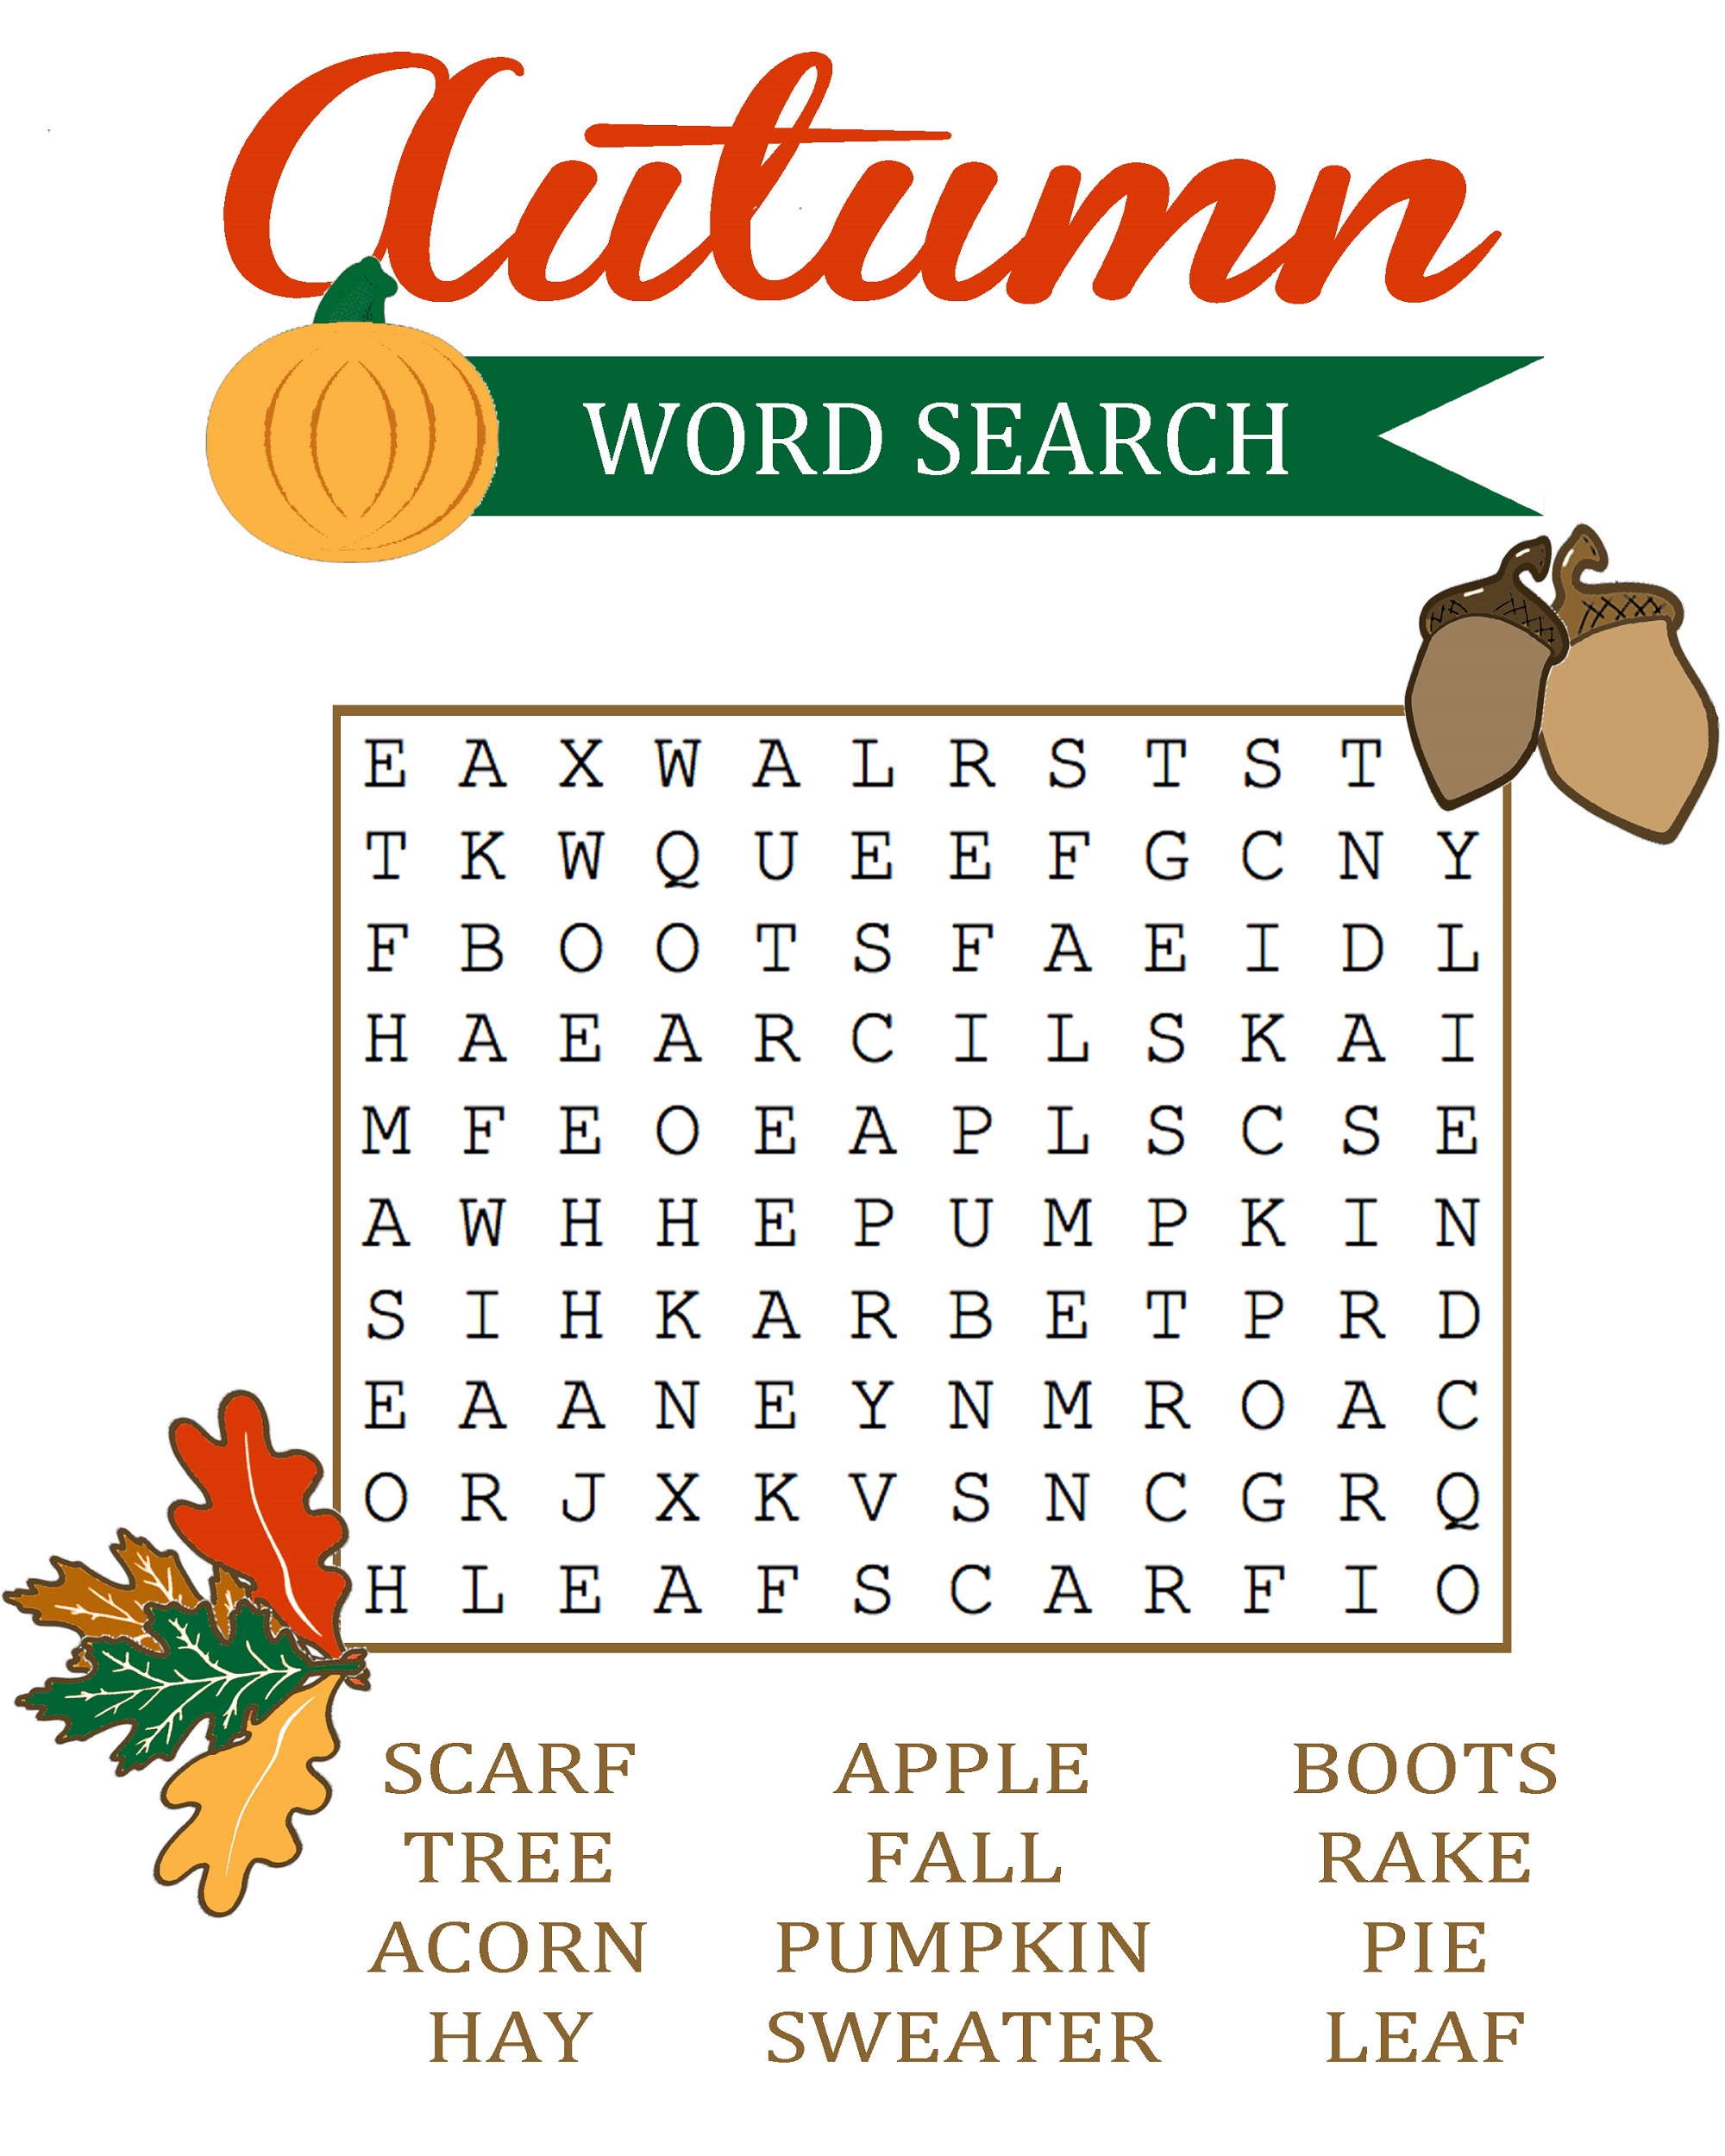 adorable-100-word-word-search-printable-tristan-website